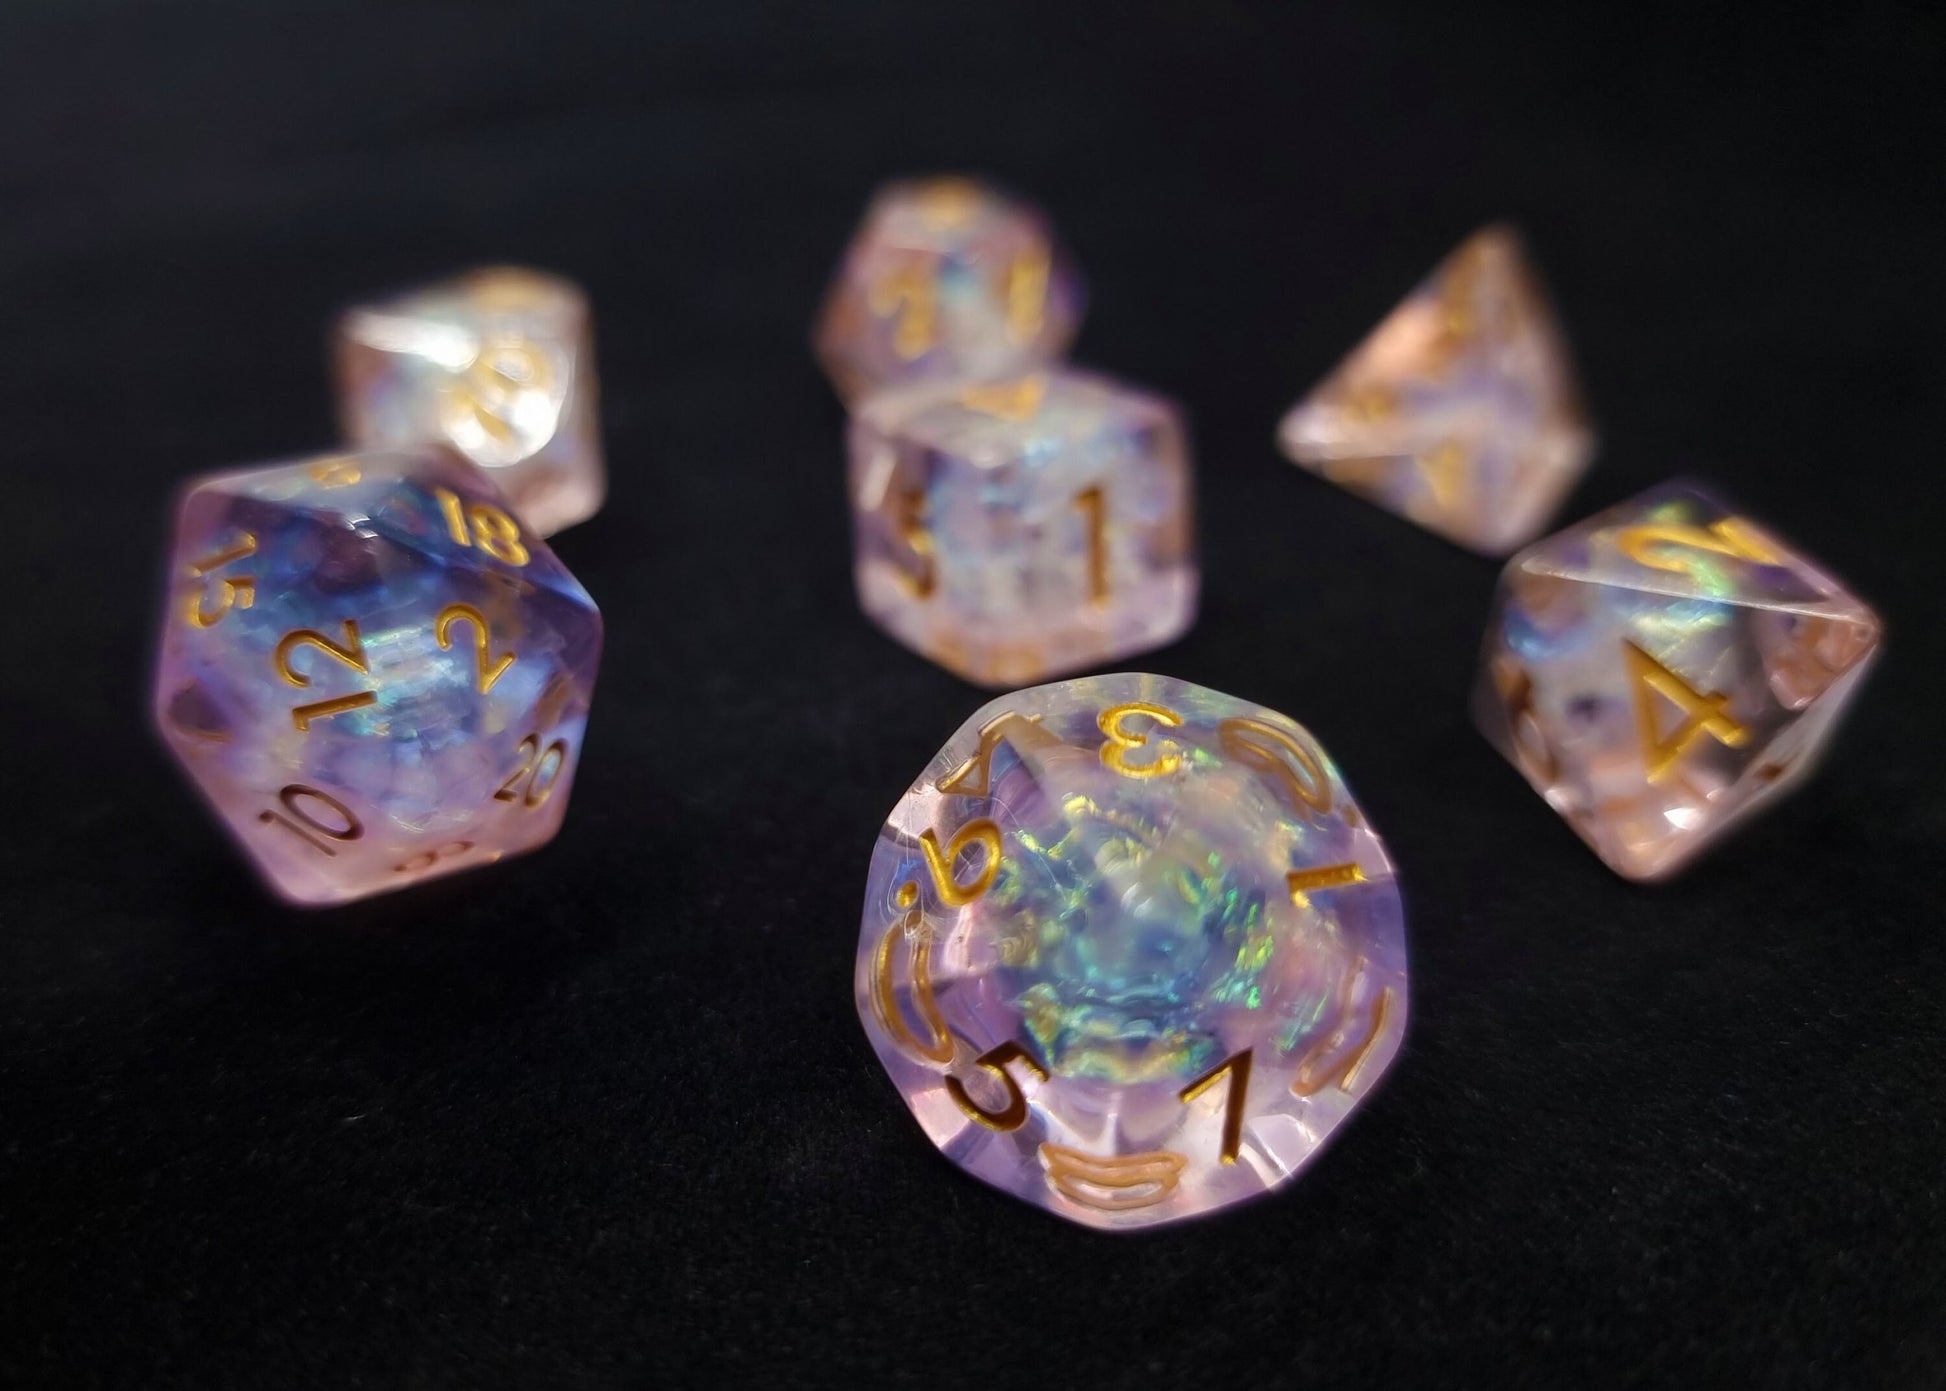 Glimmer of Hope Polyhedral Dice Set - Translucent Pale Pink Dice with Holographic Core and Gold Numbers